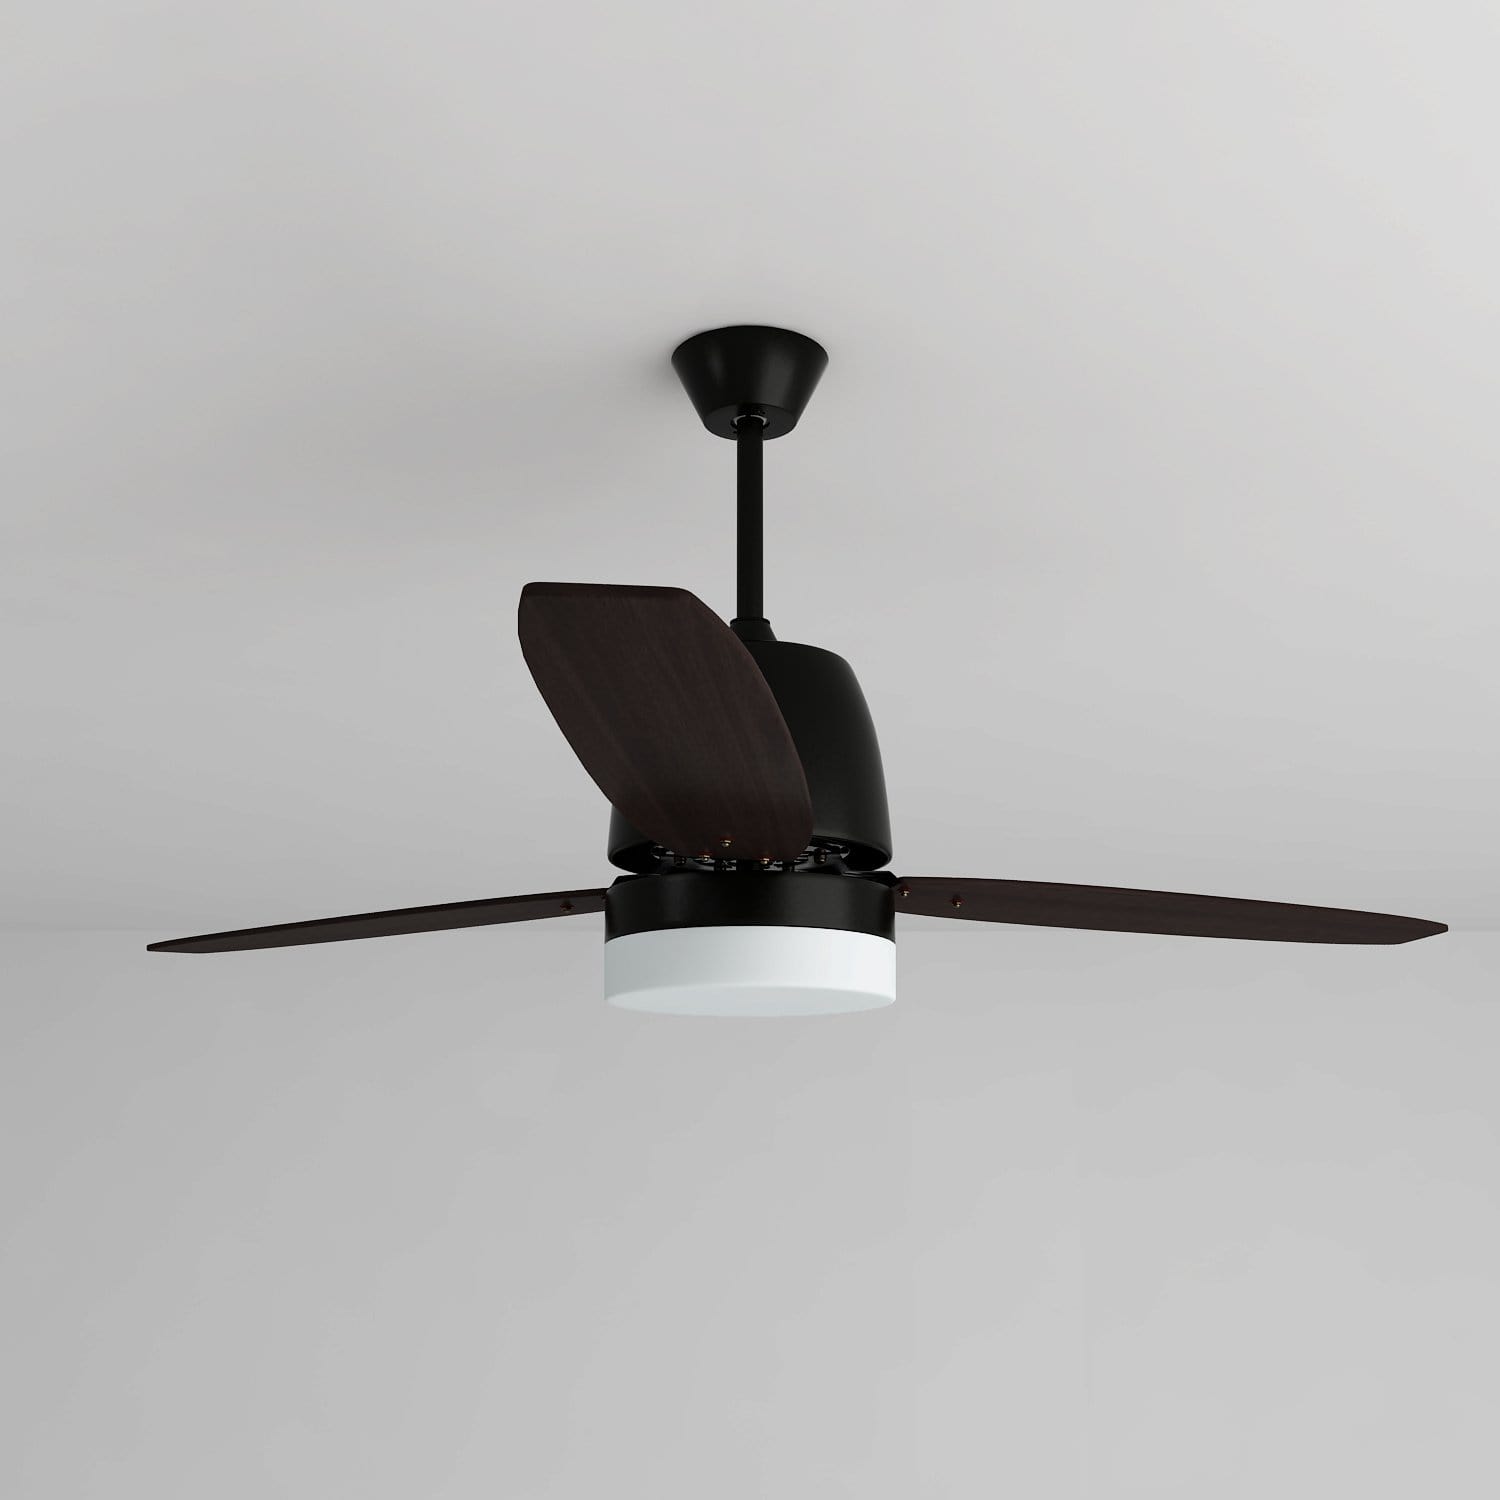 48 And 52 Ceiling Fan Ac 3 Blades With Led Light 3 Colors And